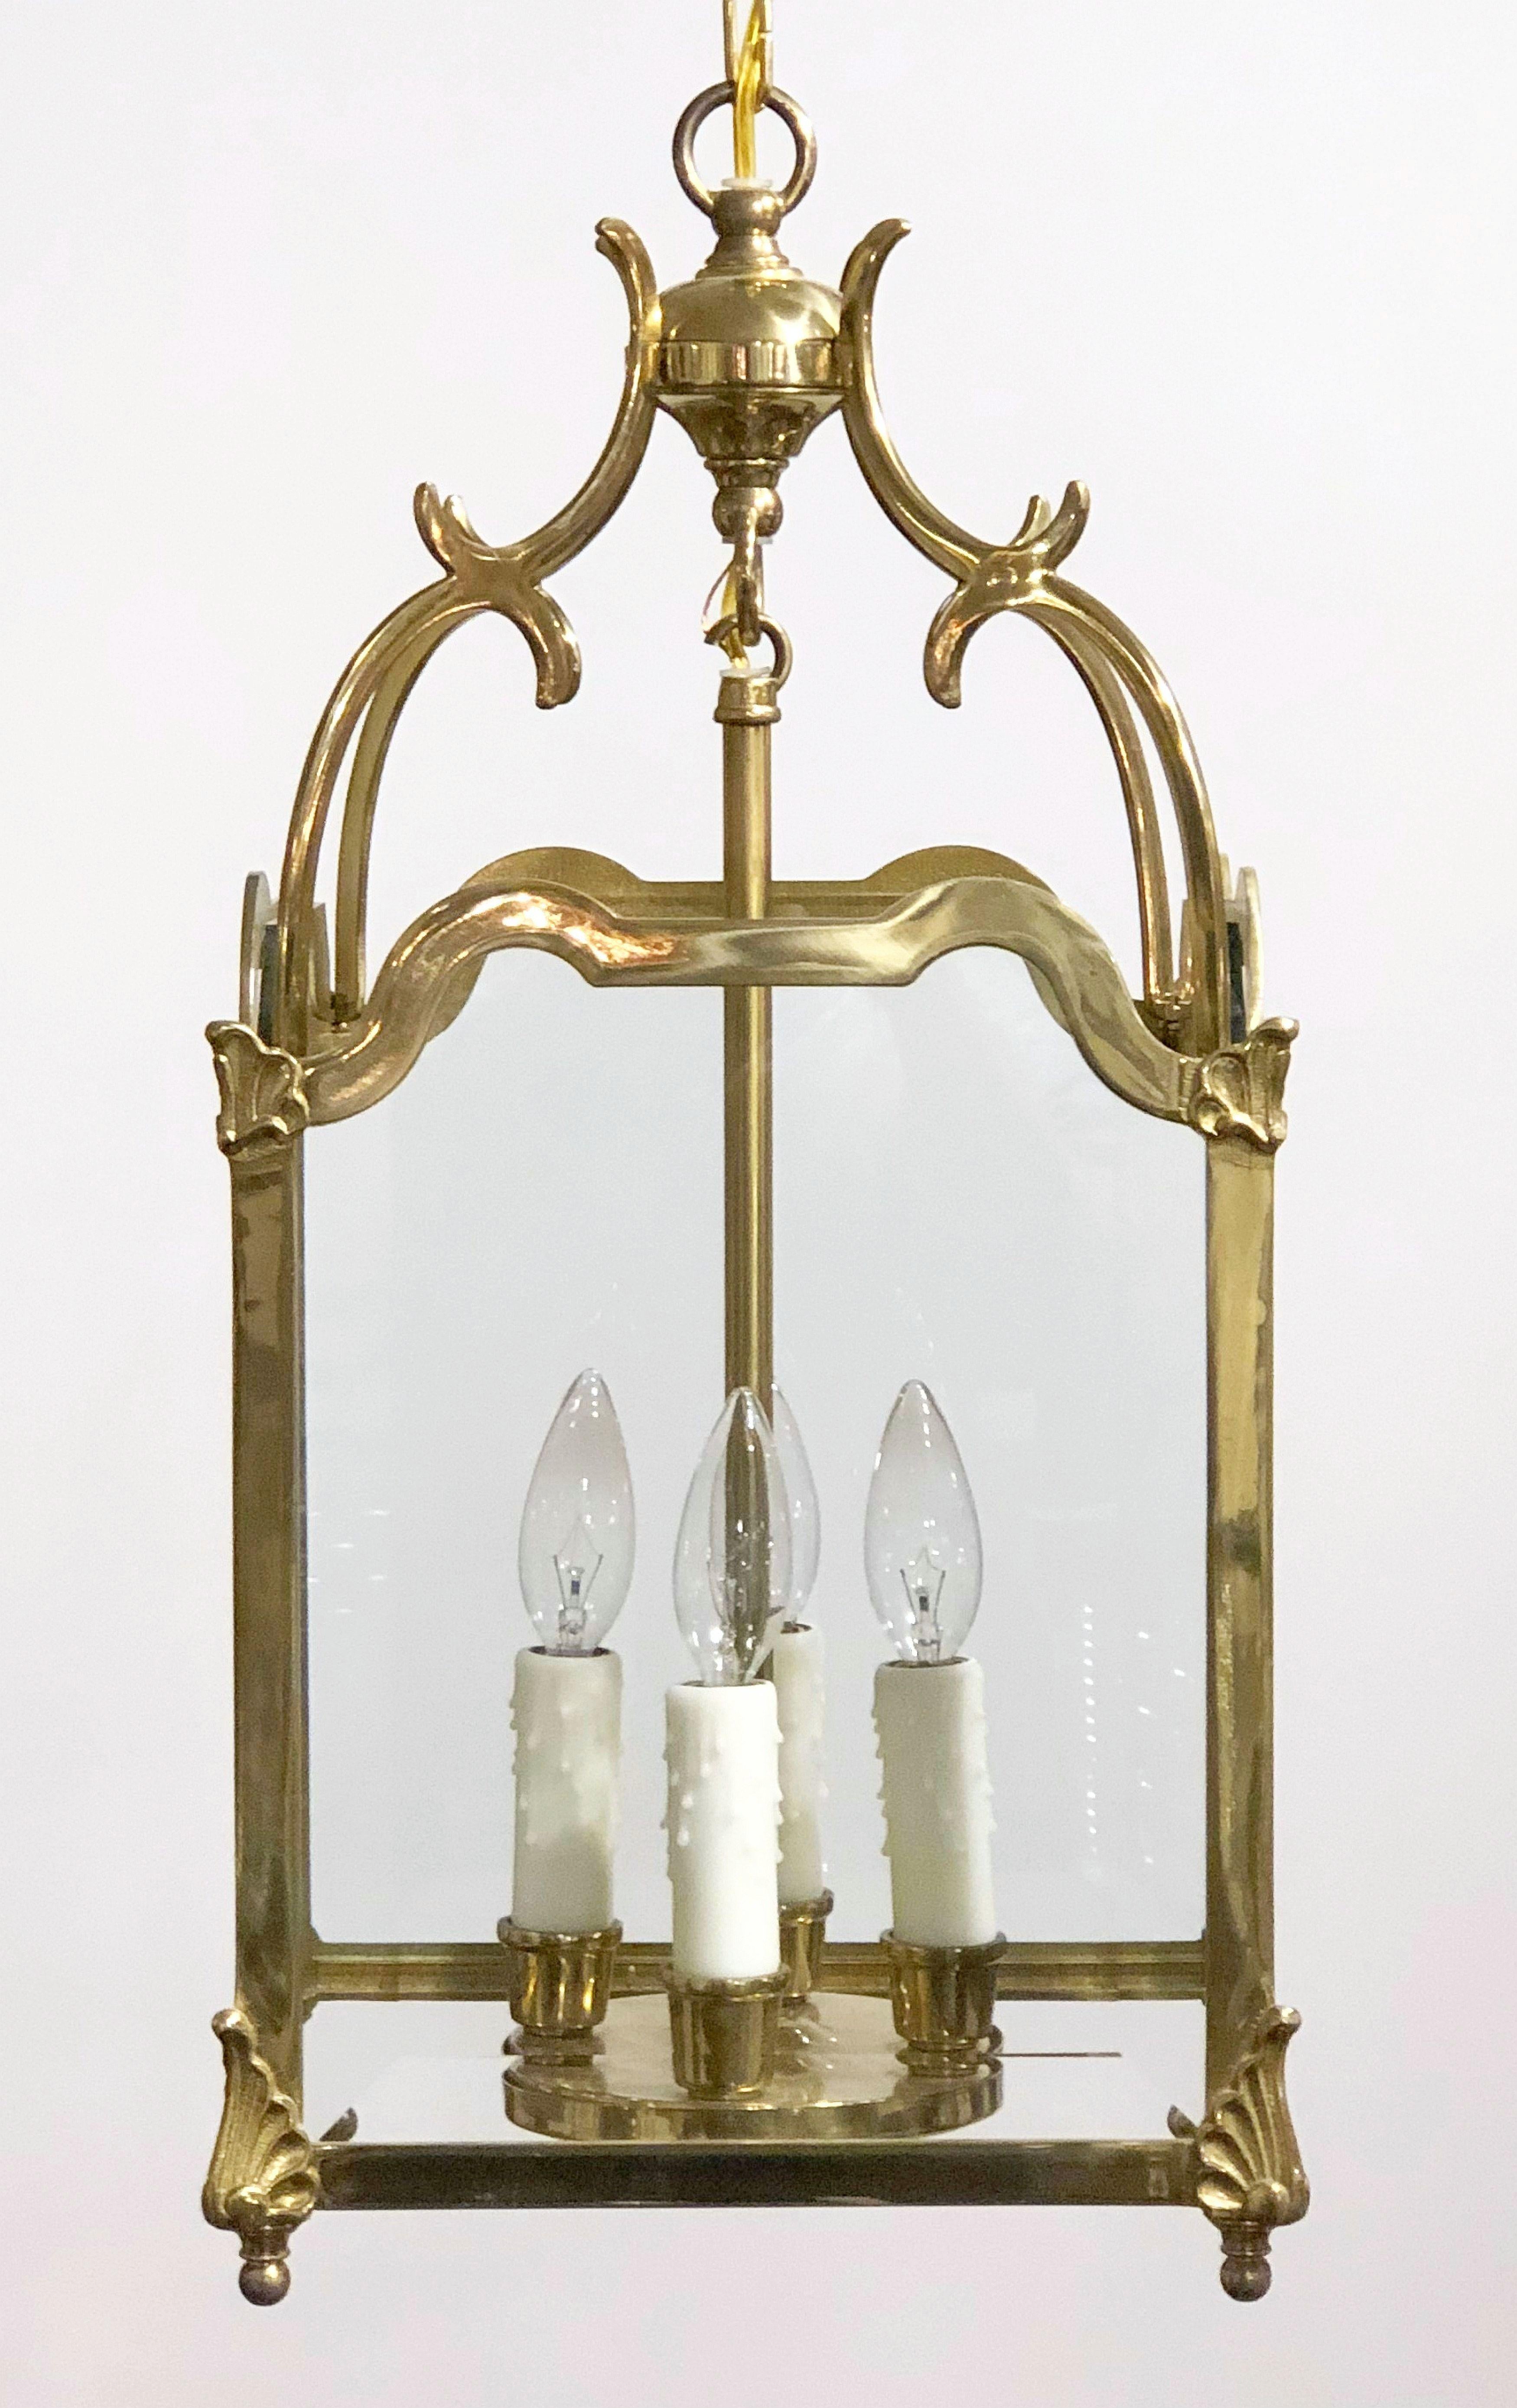 Metal English Four-Light Hanging Lantern or Light Fixture of Brass with Beveled Glass